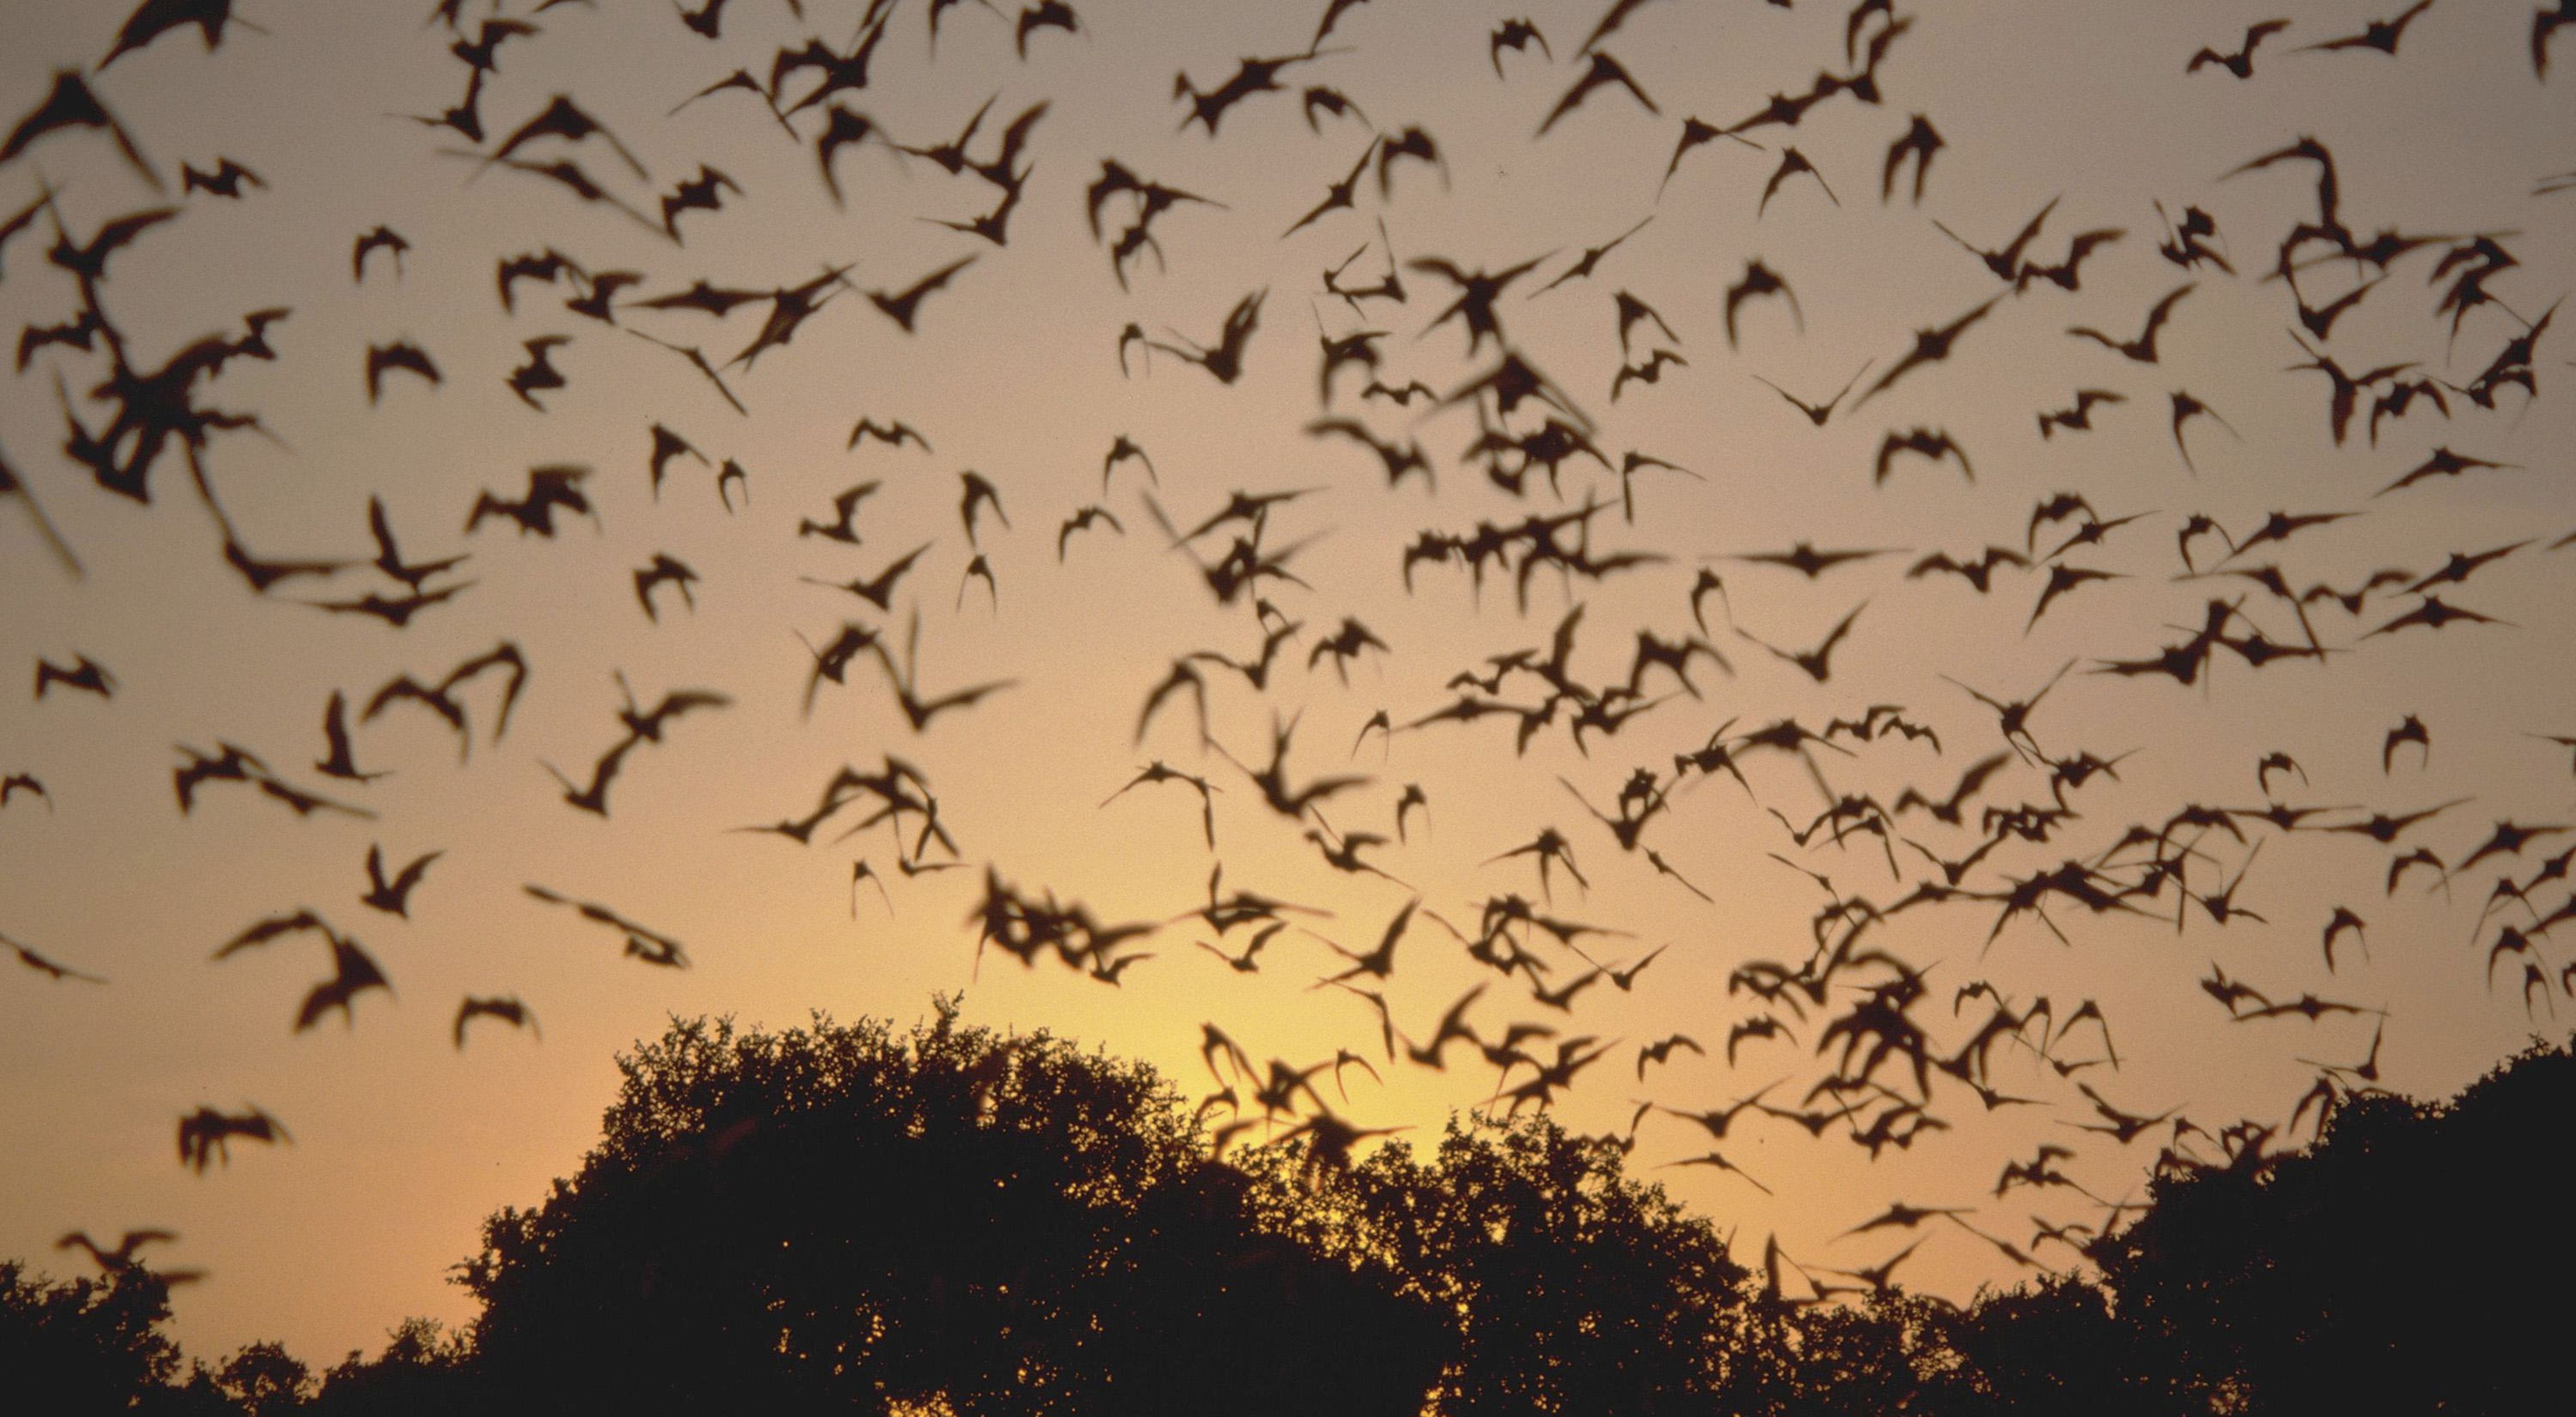 Bats fill the sky at dusk as they leave their daytime roost to hunt for insects.